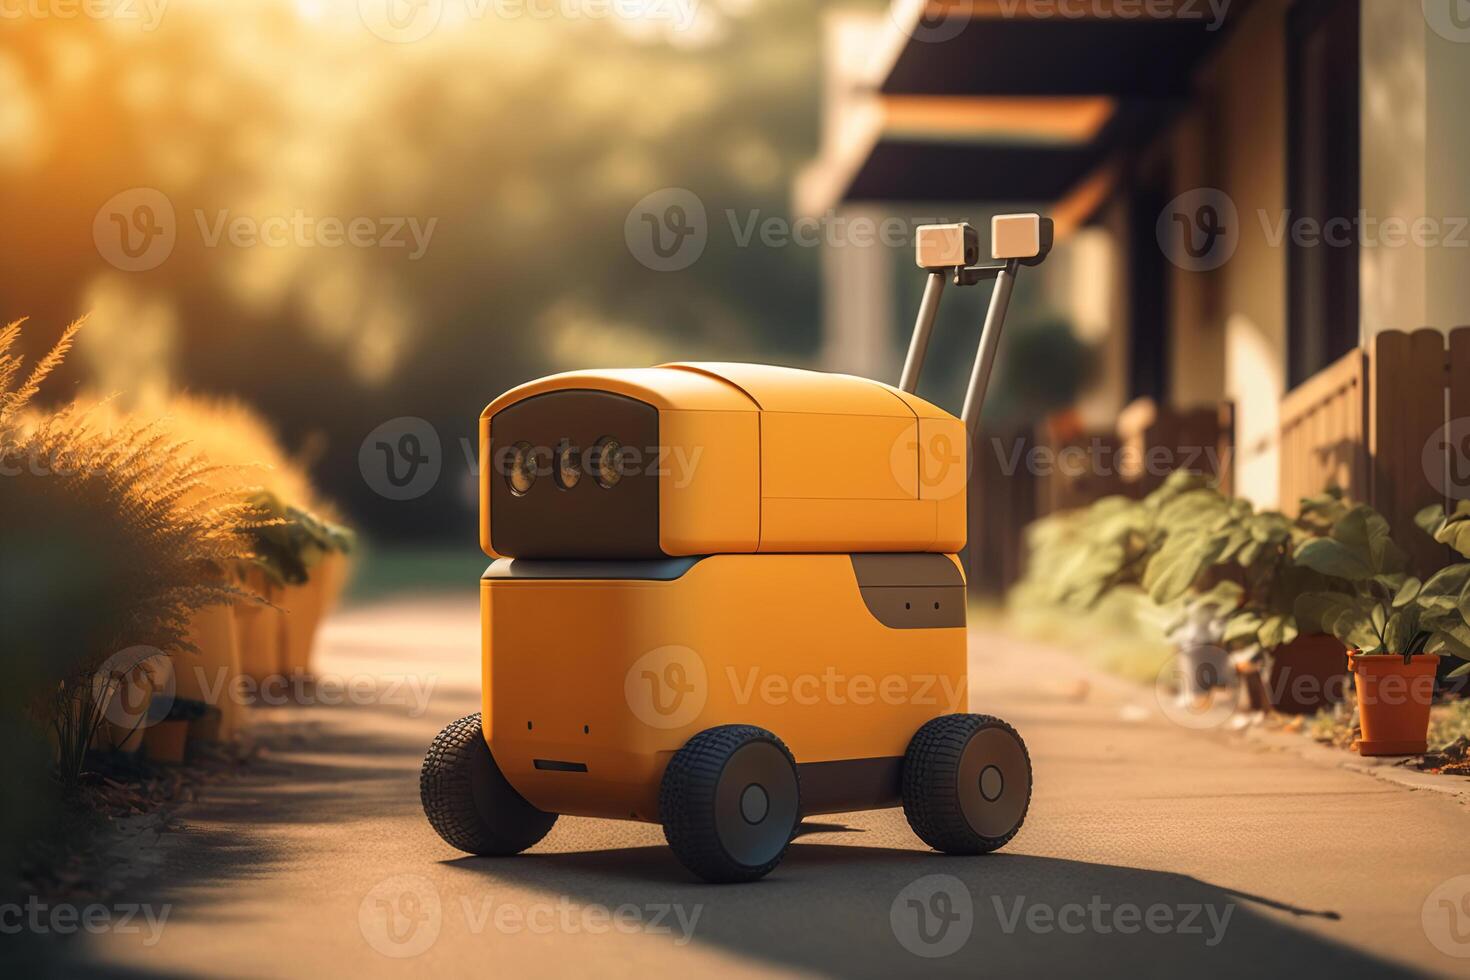 Robotic service, technology of future. Minimalistic yellow robot with camera eyes on sidewalk in street. photo